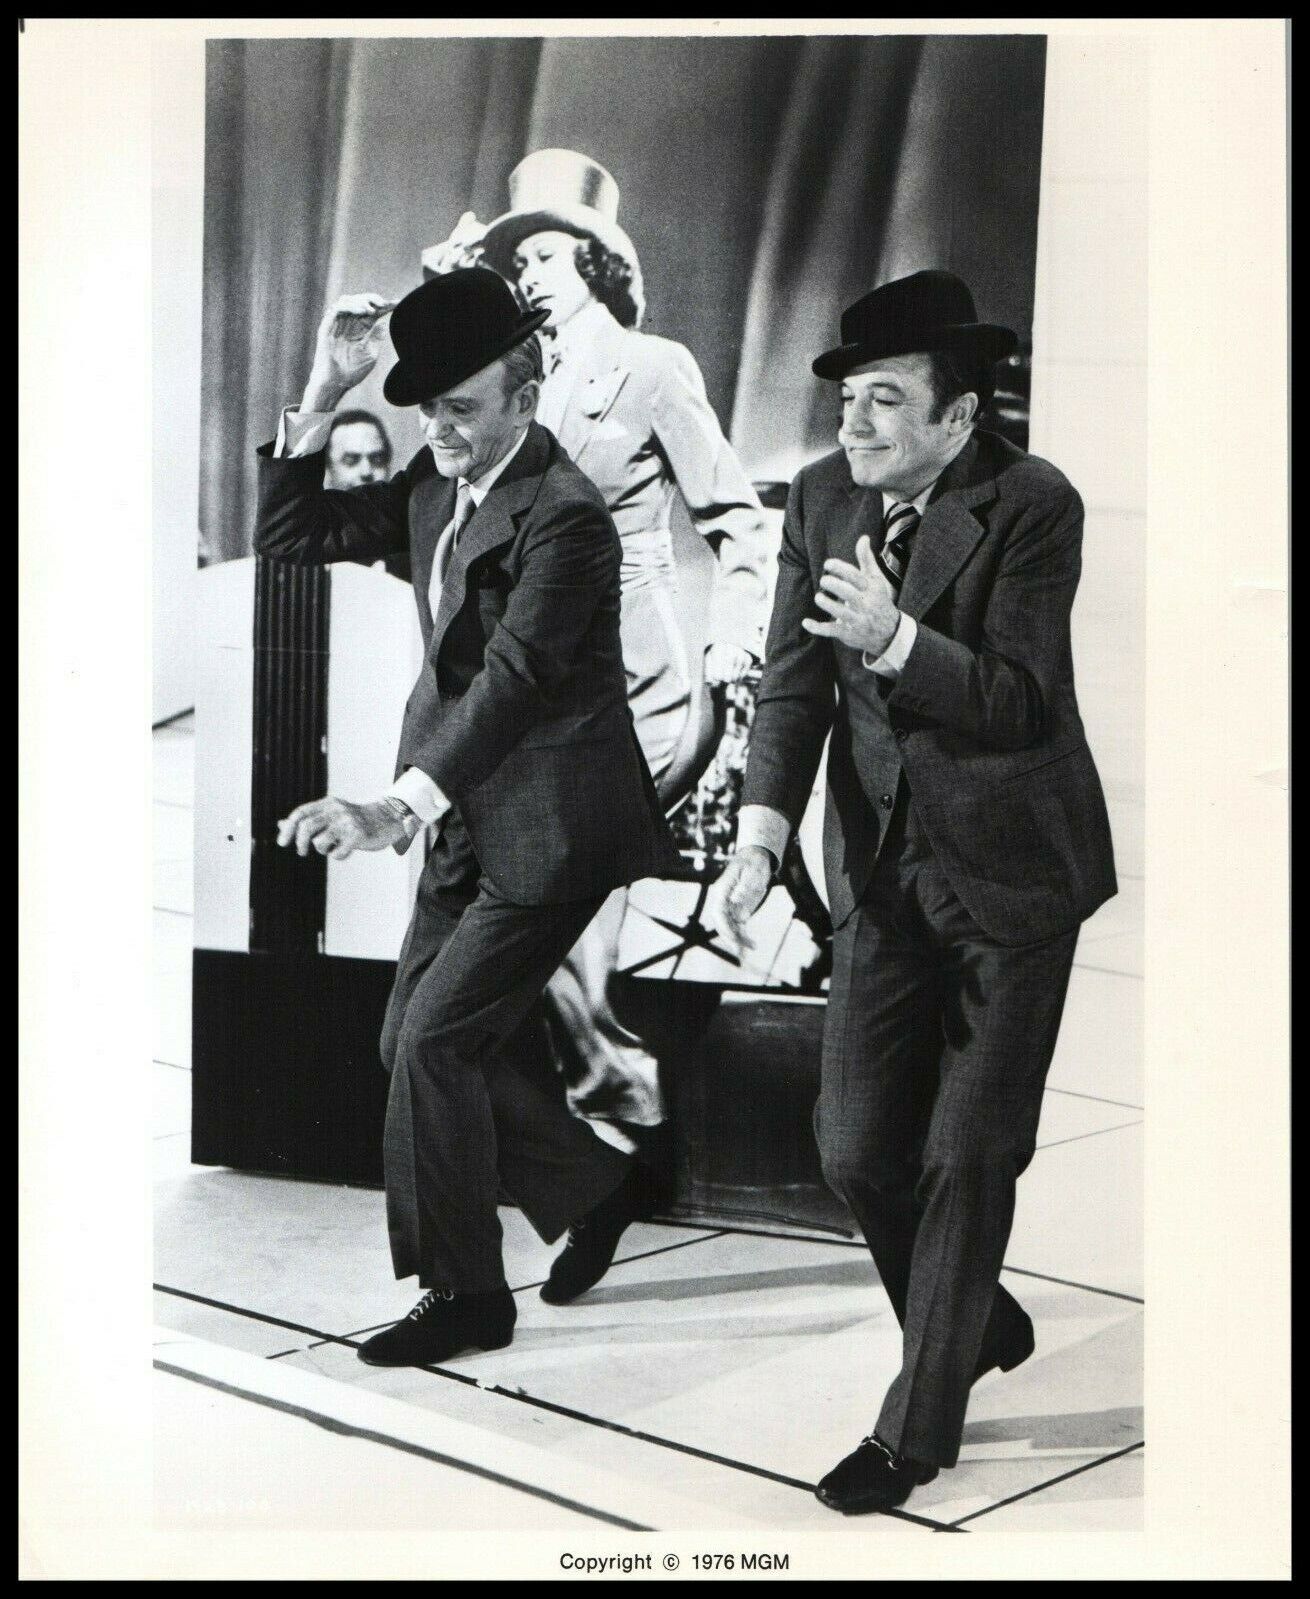 Gene Kelly + FRED ASTAIRE MGM 1976 MUSIC LEGENDS DANCING PORTRAIT PHOTO C 13